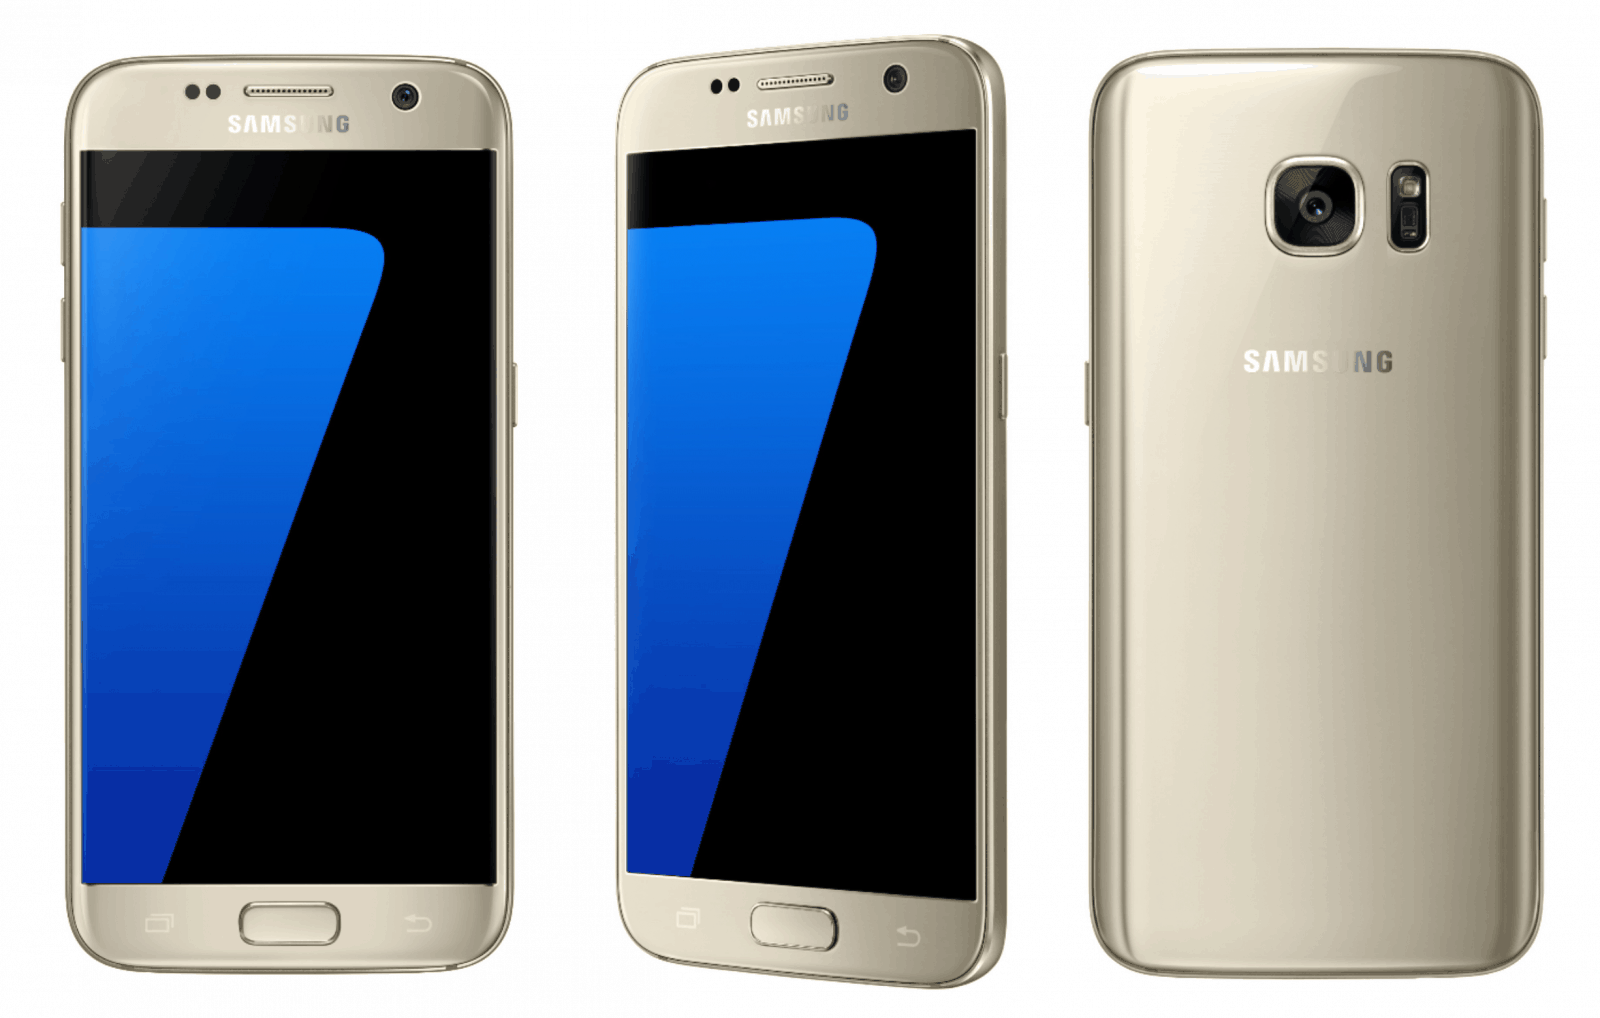 Cult of Android - Samsung's new Galaxy S7, S7 edge bring better designs